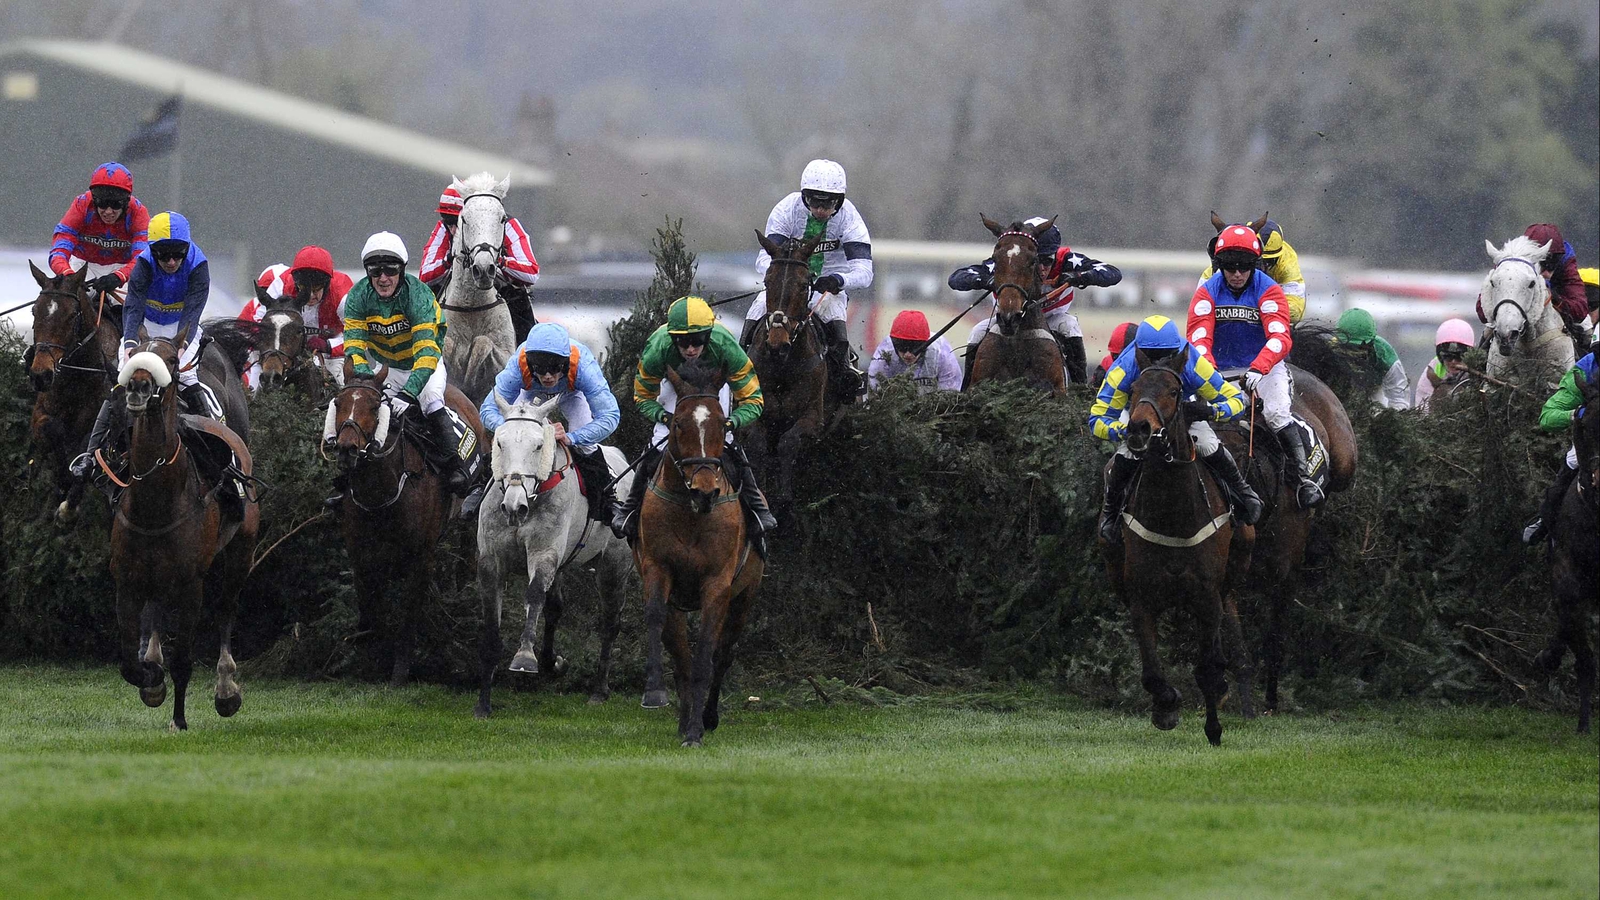 Grand National: Who to back in the big race